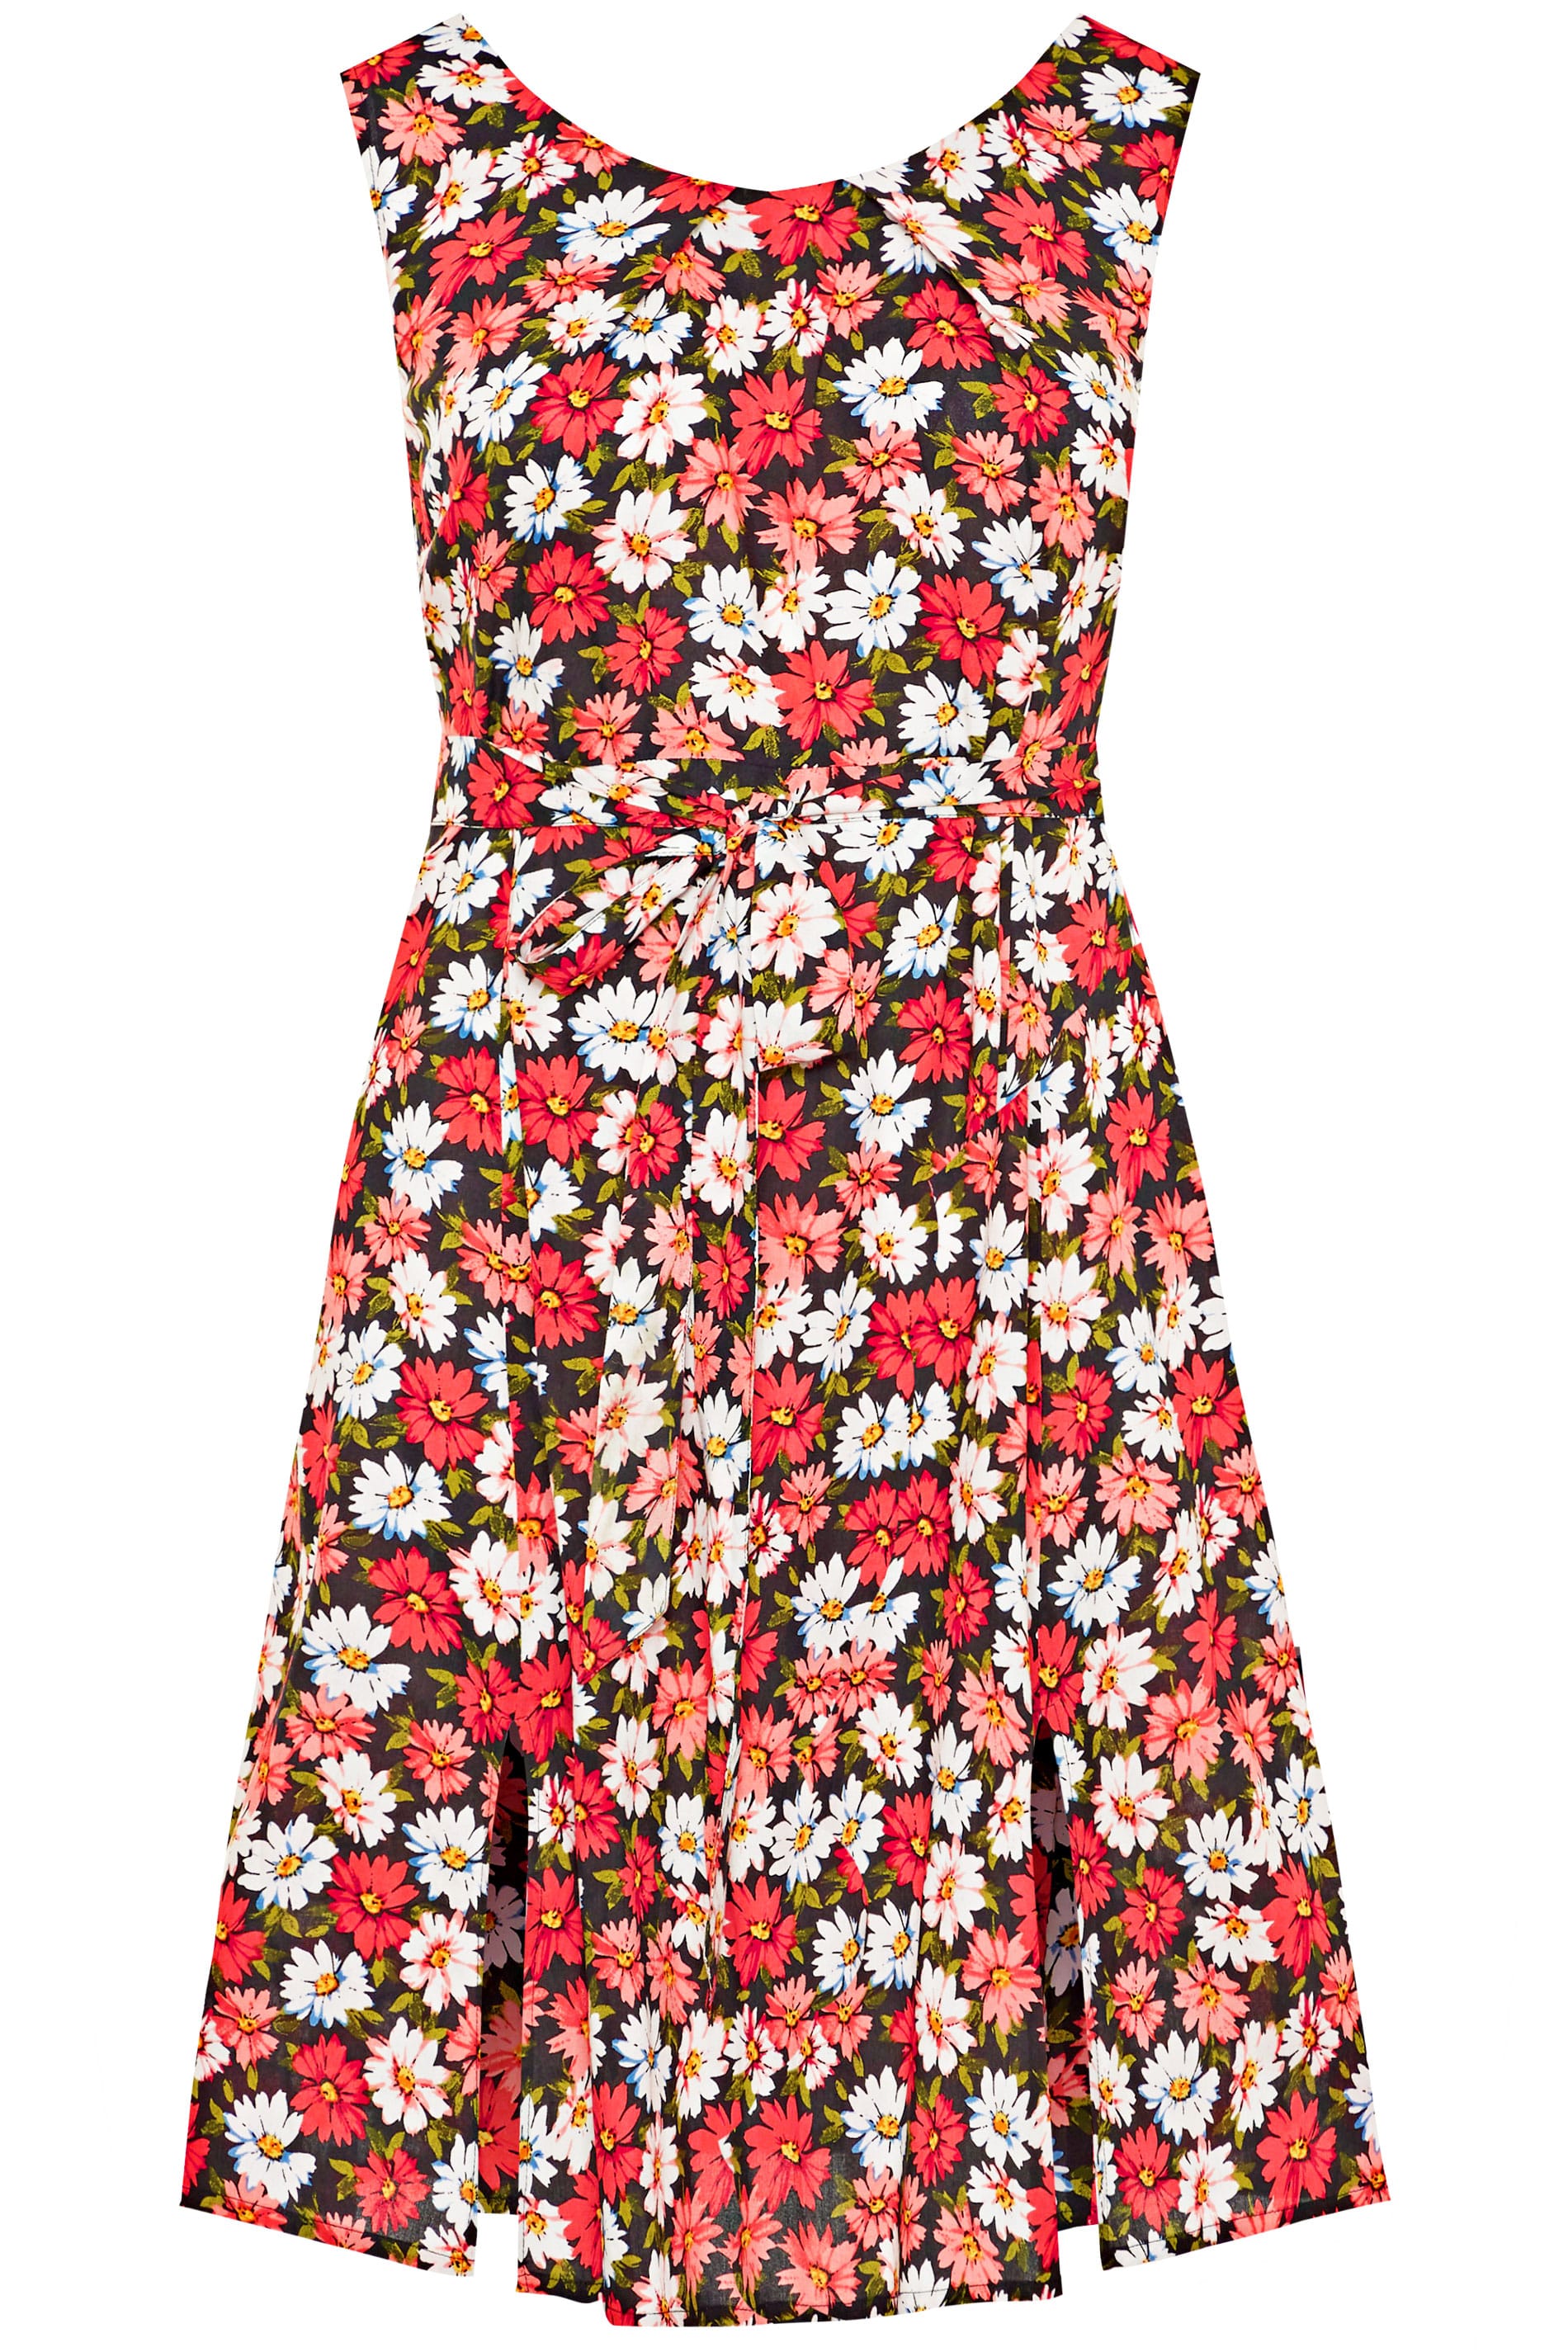 Black & Coral Daisy Print Skater Dress | Yours Clothing